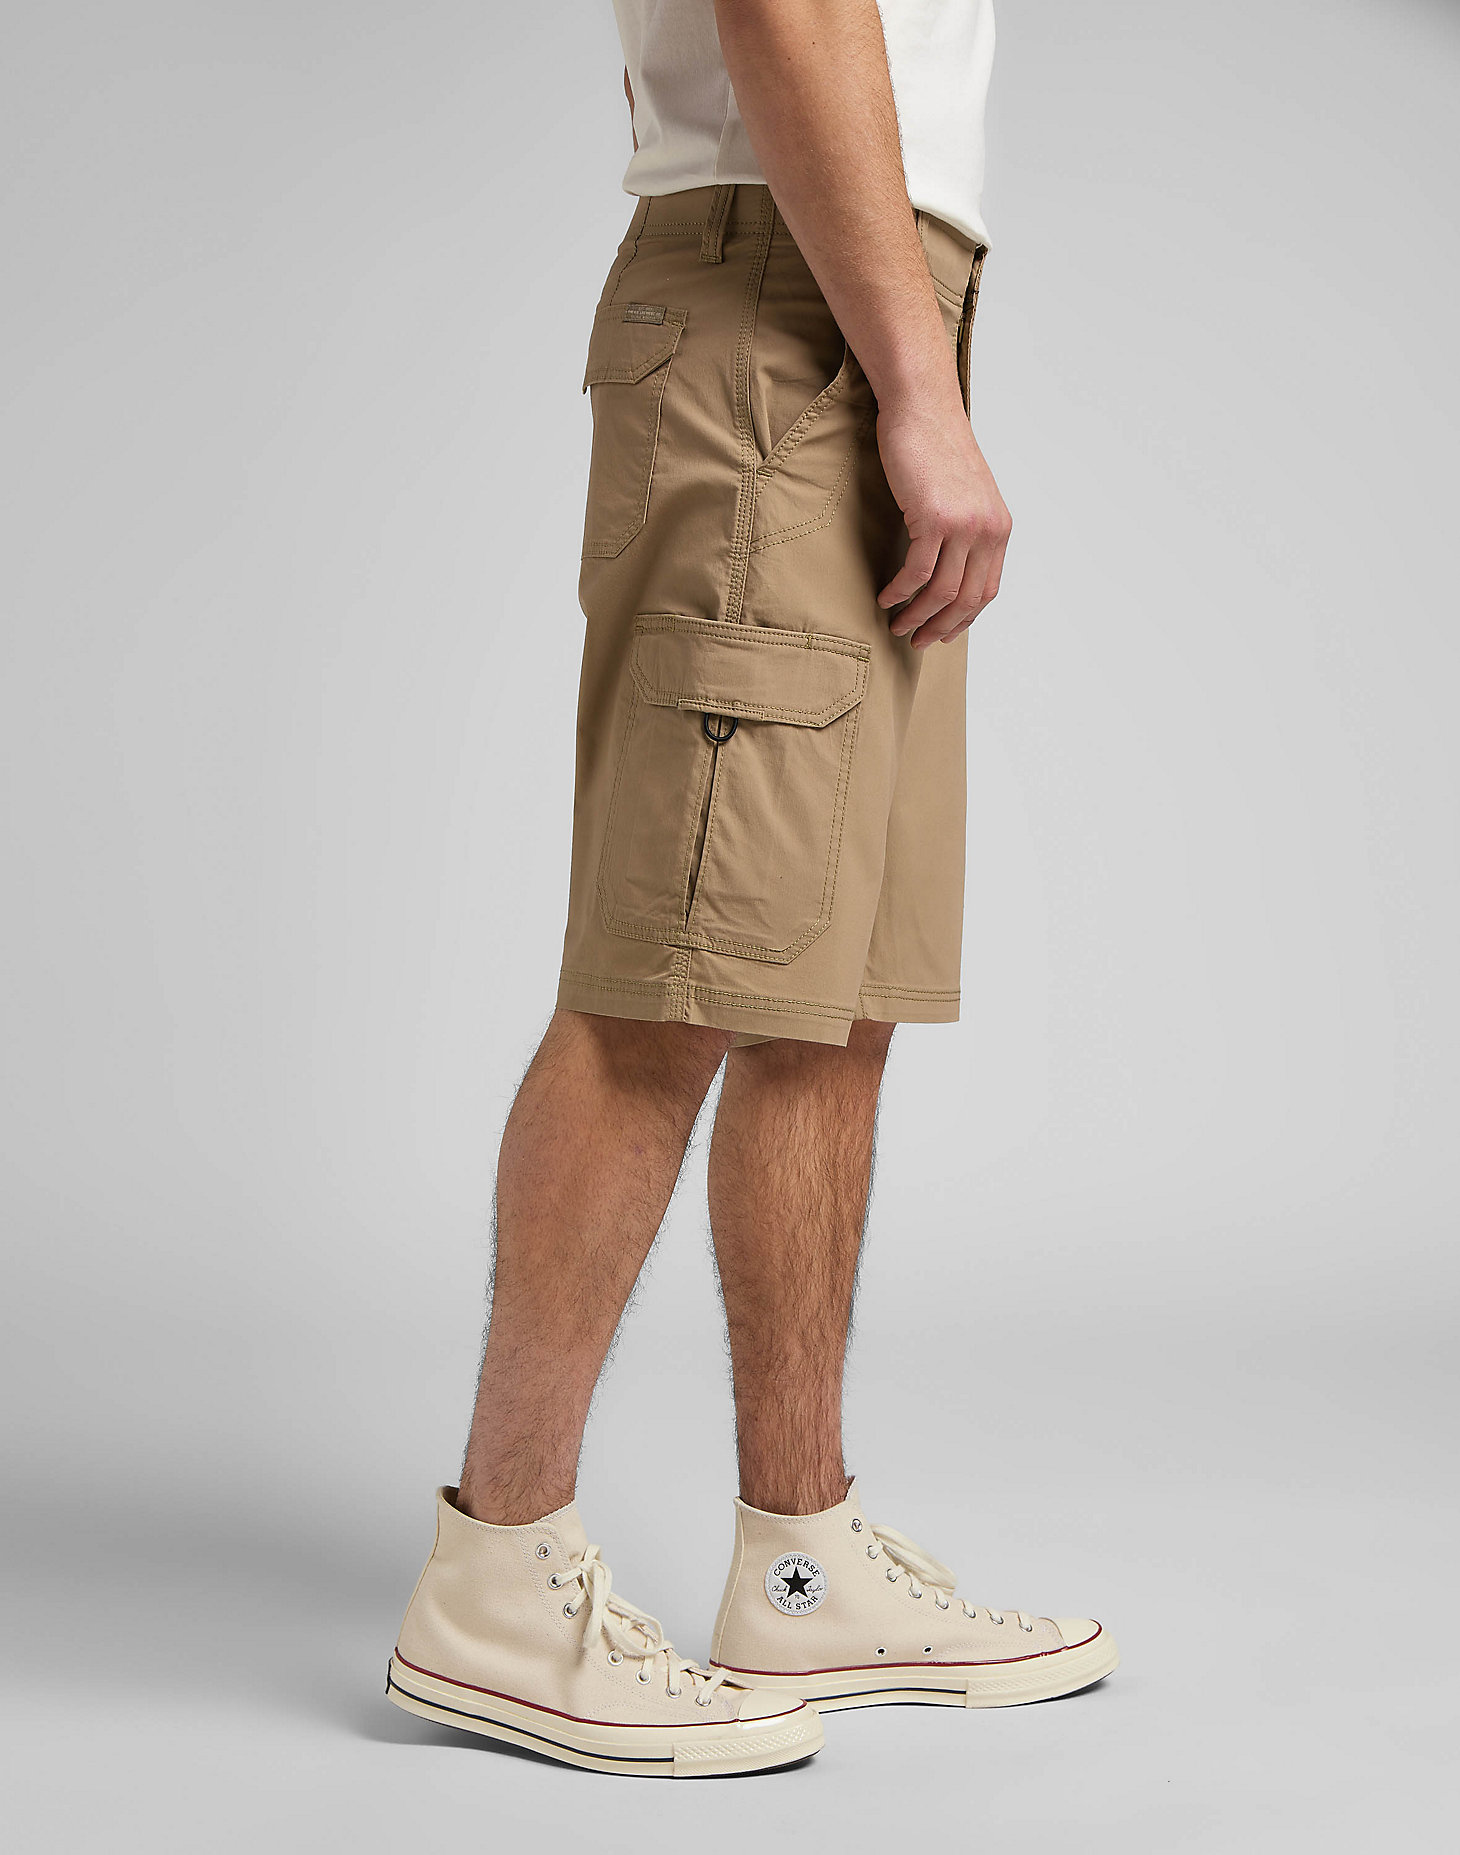 Extreme Motion Crossroad Cargo Short in Nomad alternative view 3